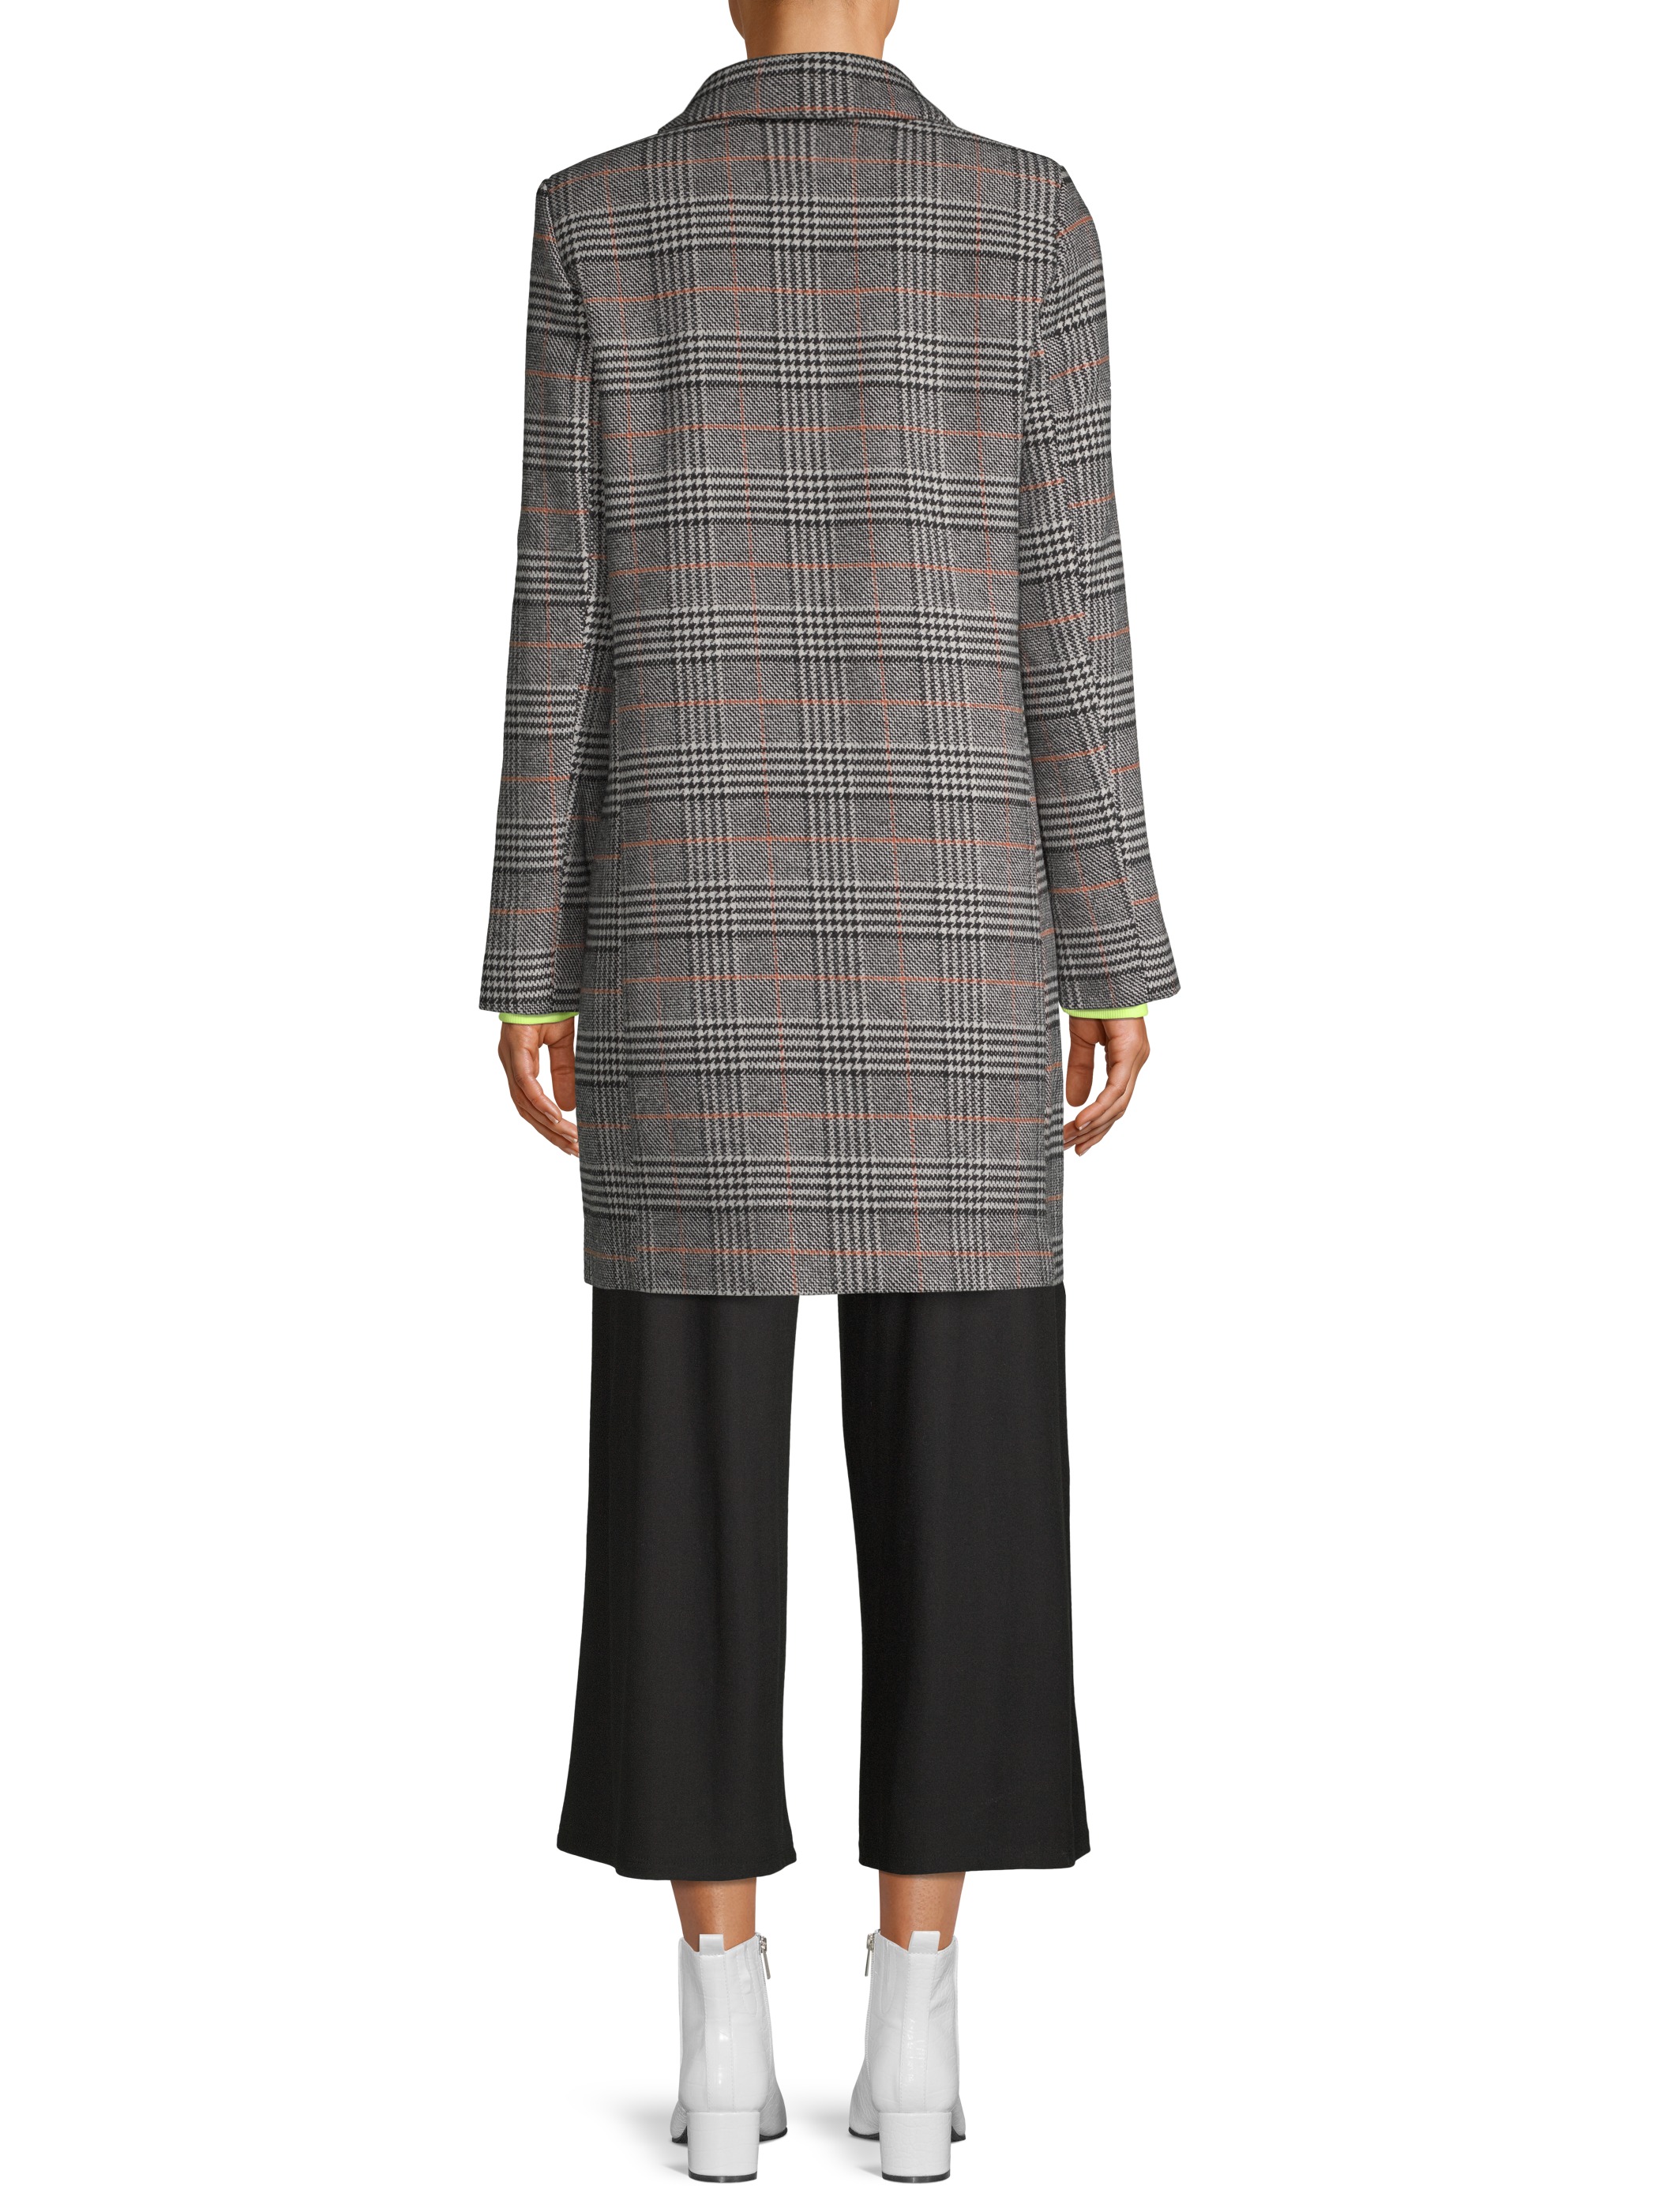 Kendall + Kylie Women's Plaid Coat - image 5 of 6